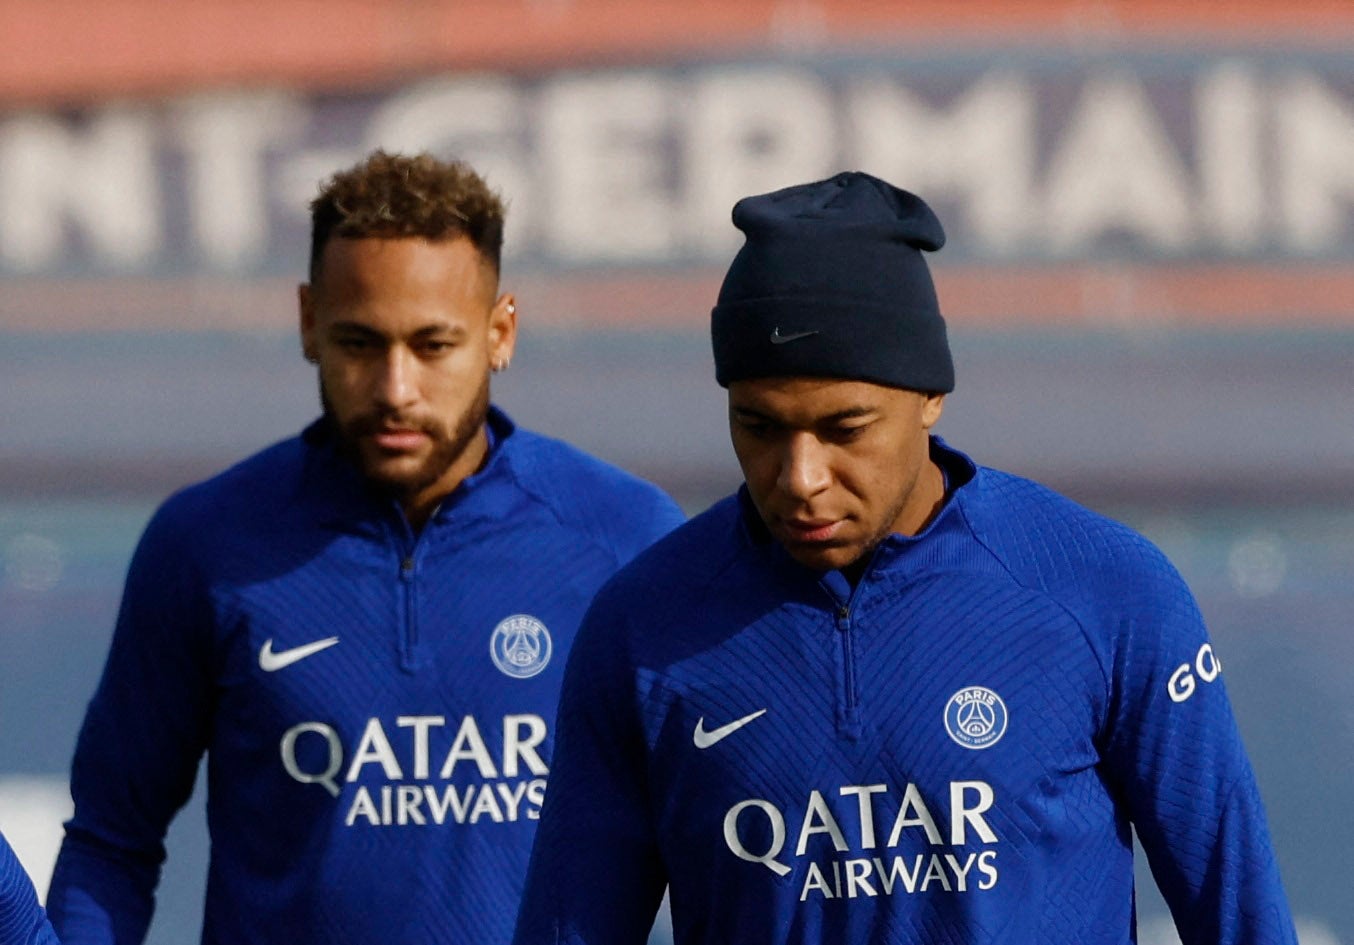 Mbappe was keen for PSG to part ways with Neymar last summer